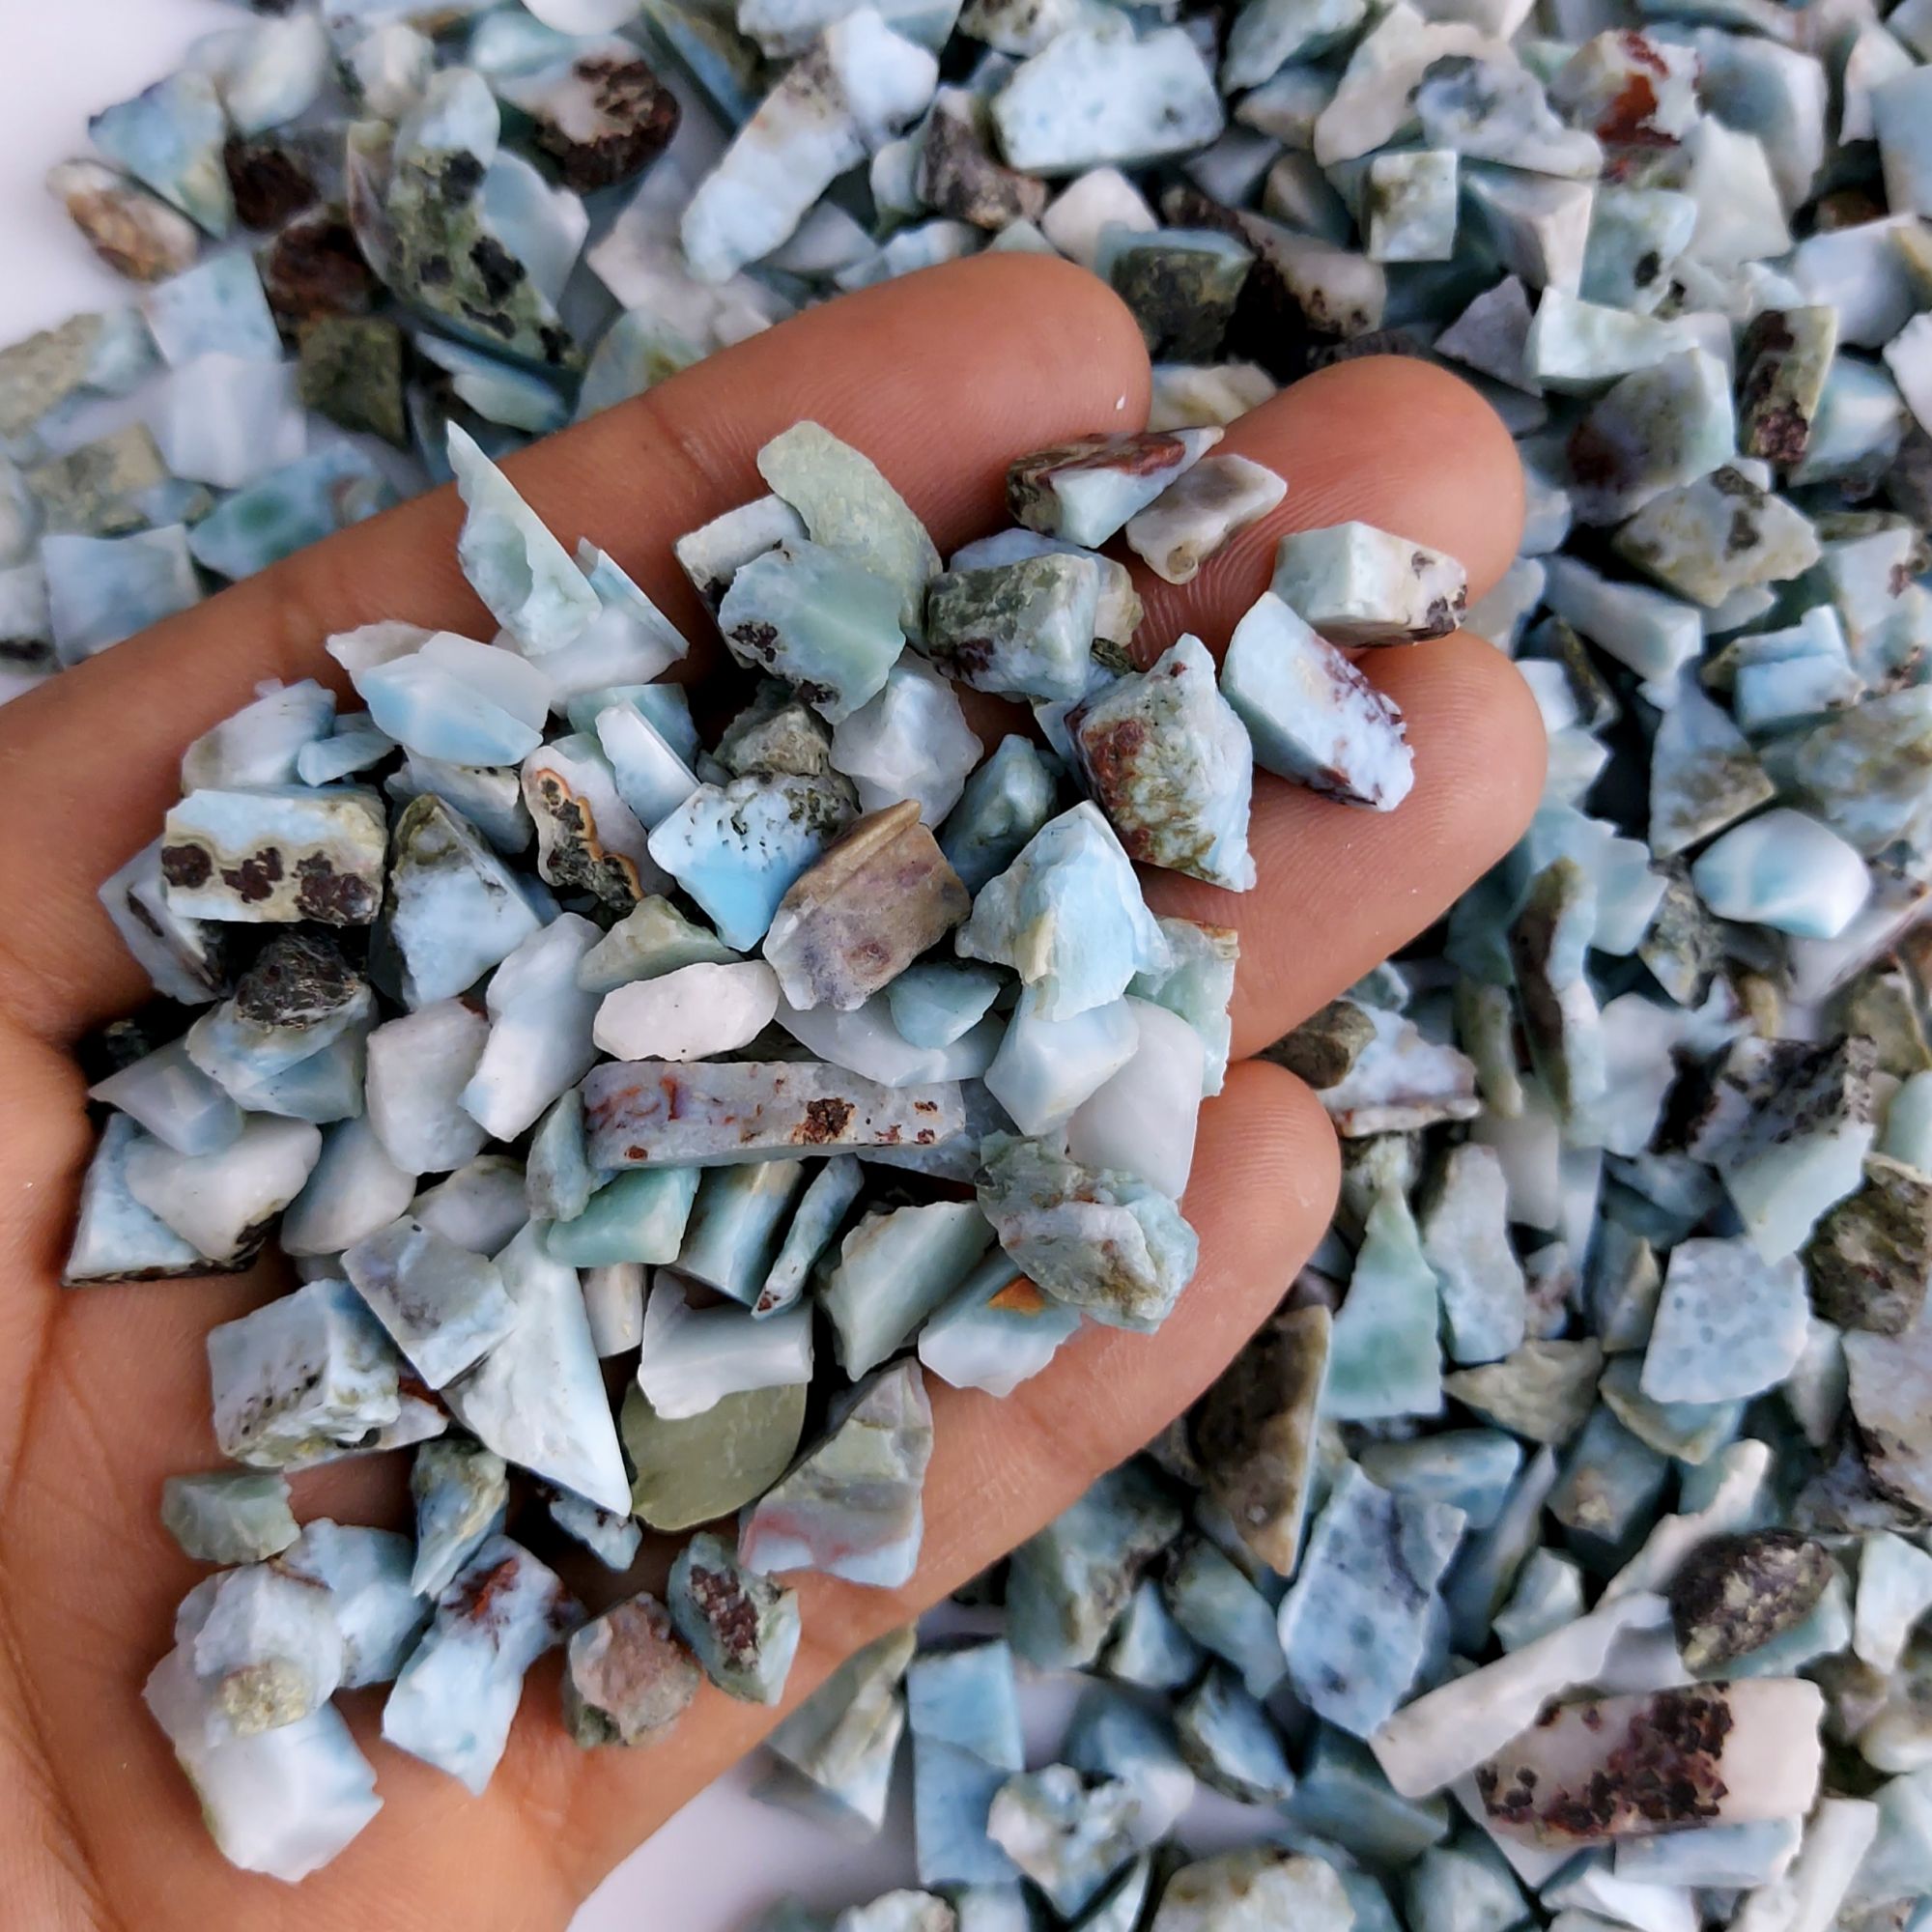 2508Cts  Natural Blue Raw Larimar Rough Unpolished and Undrill Cabochon Gemstone Lot For Jewelry Making 20X6 11X6 mm#654